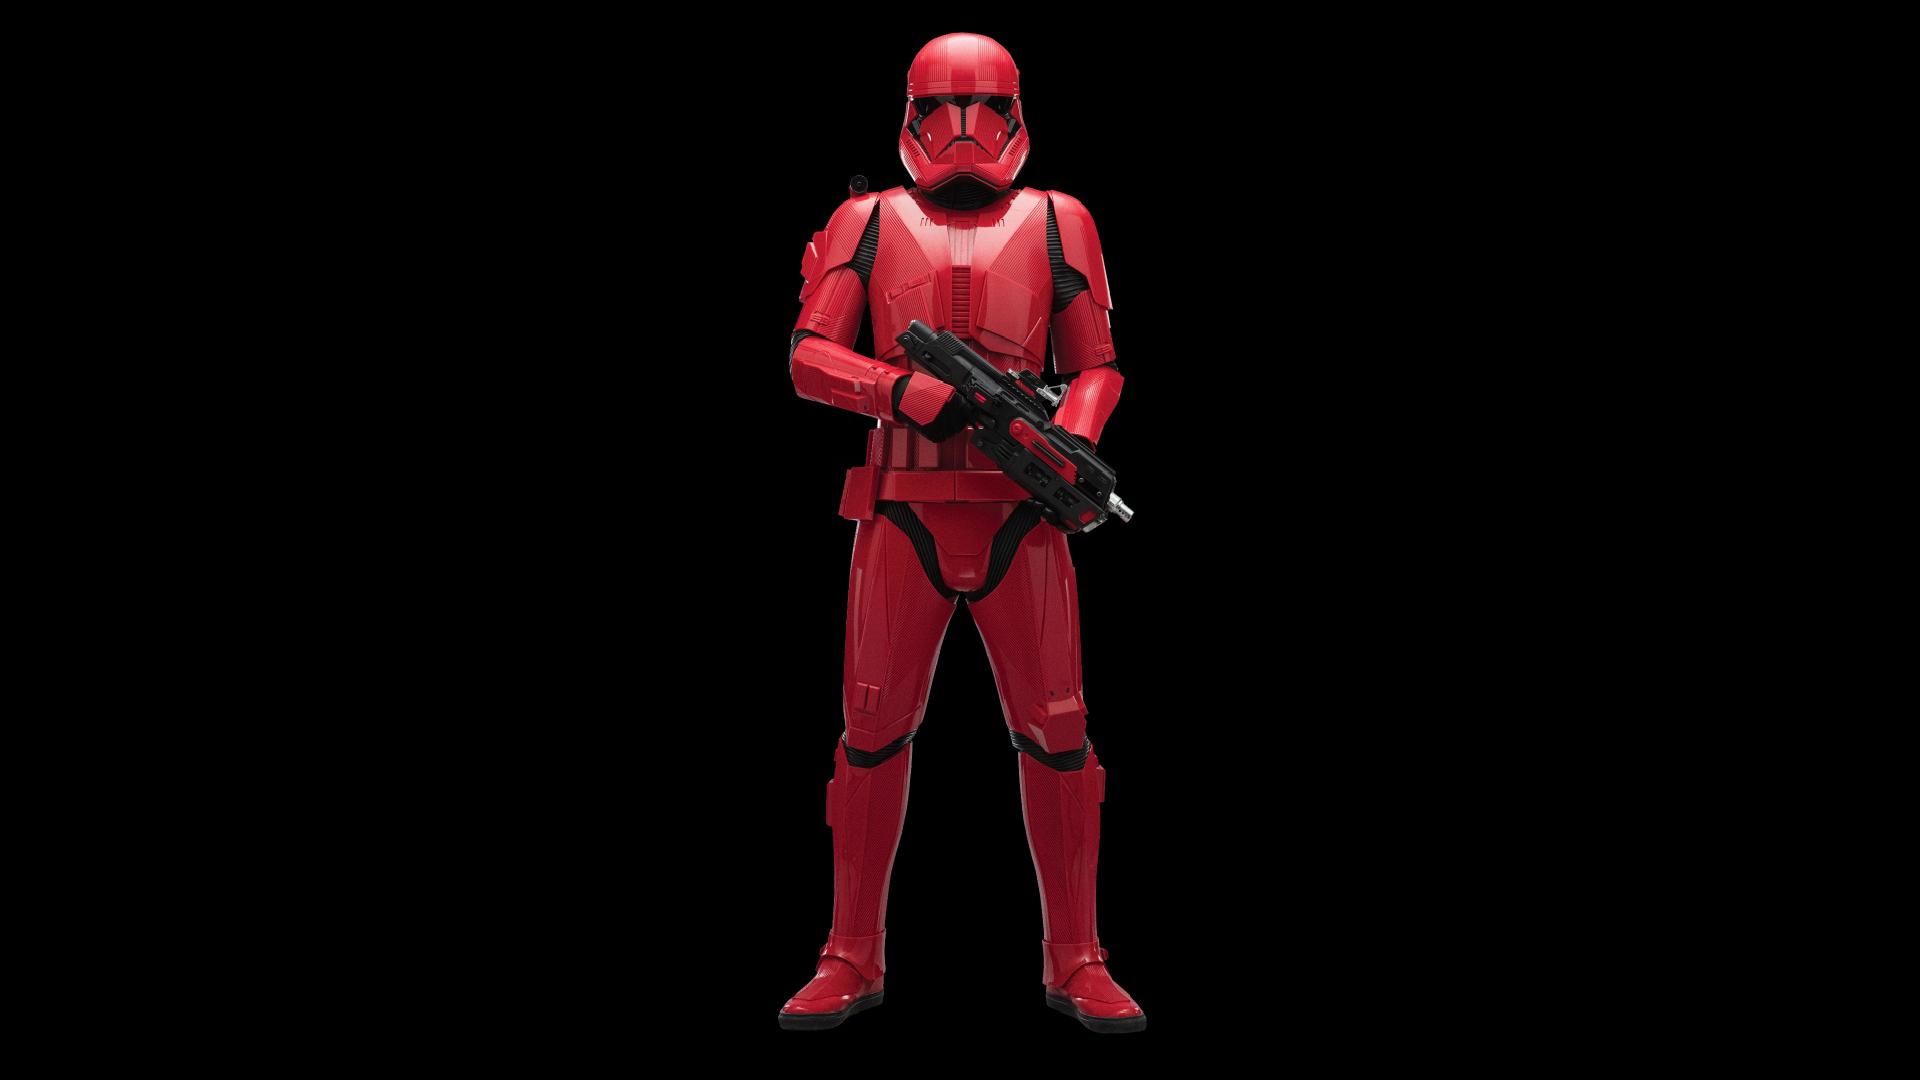 Star Wars The Rise Of Skywalker, Sith Trooper HQ Image Free